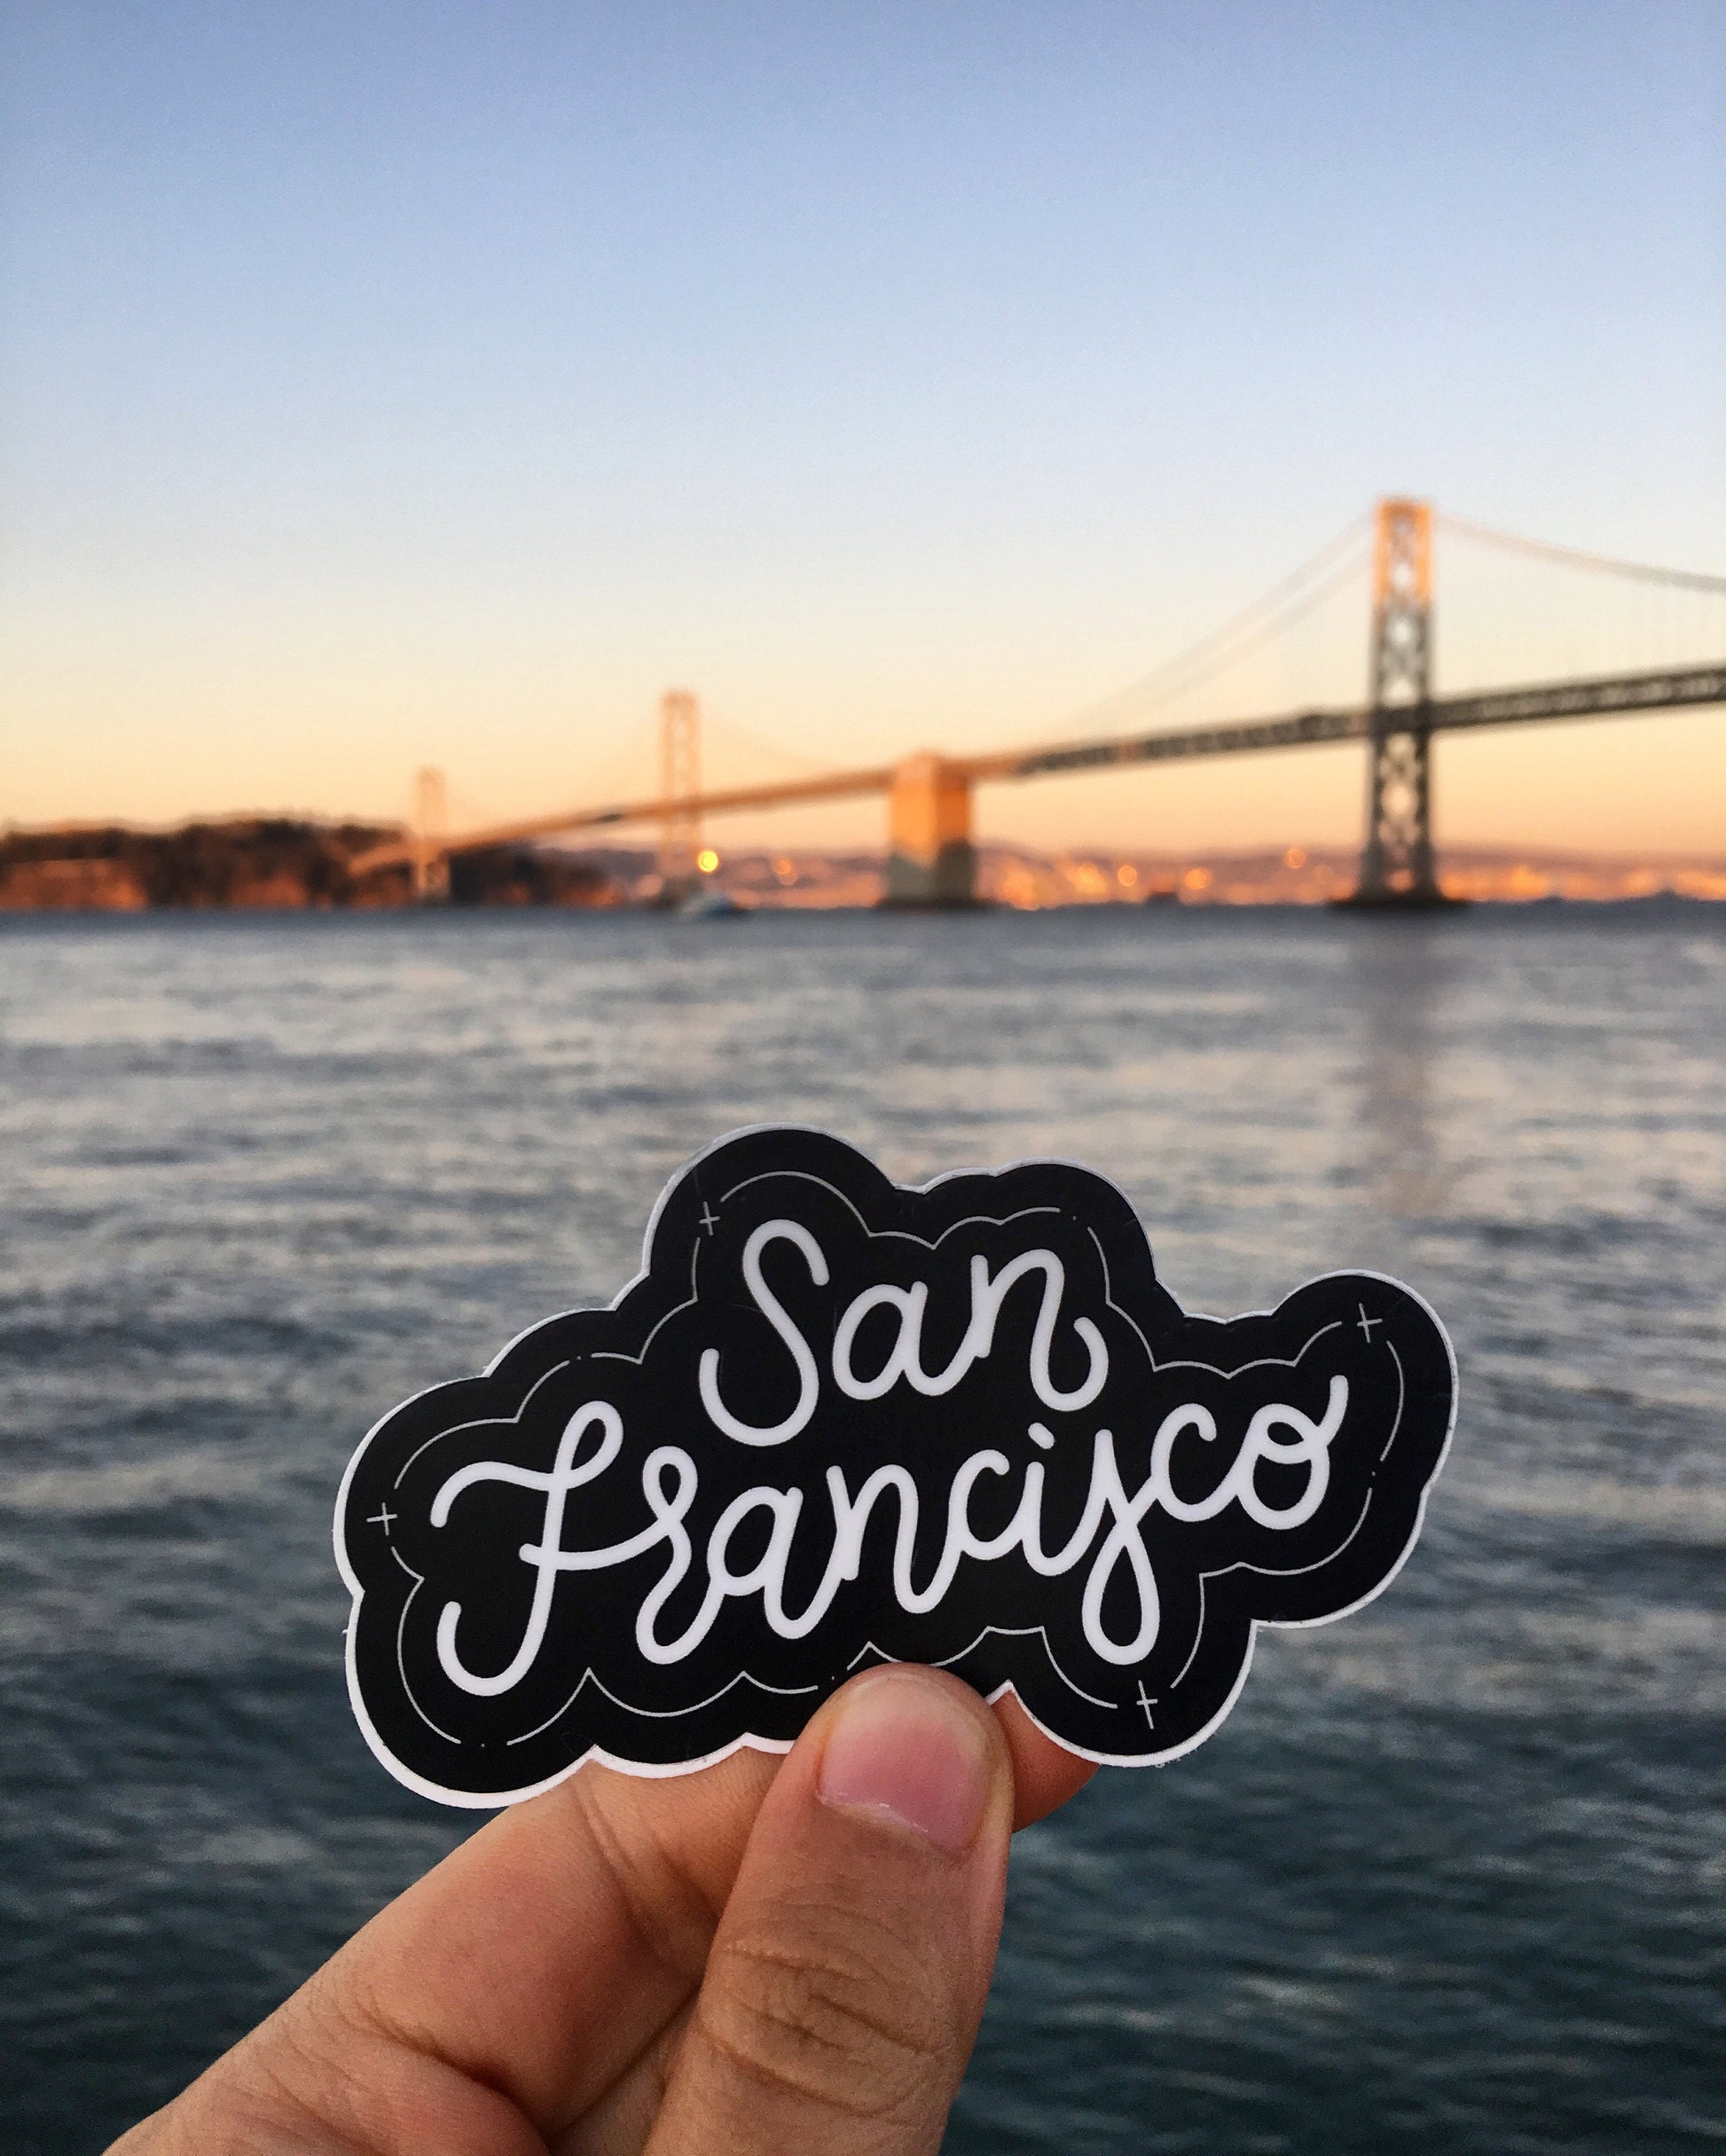 A hand holding a black and white JaneLi.Co sticker that says "San Francisco" in cursive lettering in front of the Bay Bridge in San Francisco, California.